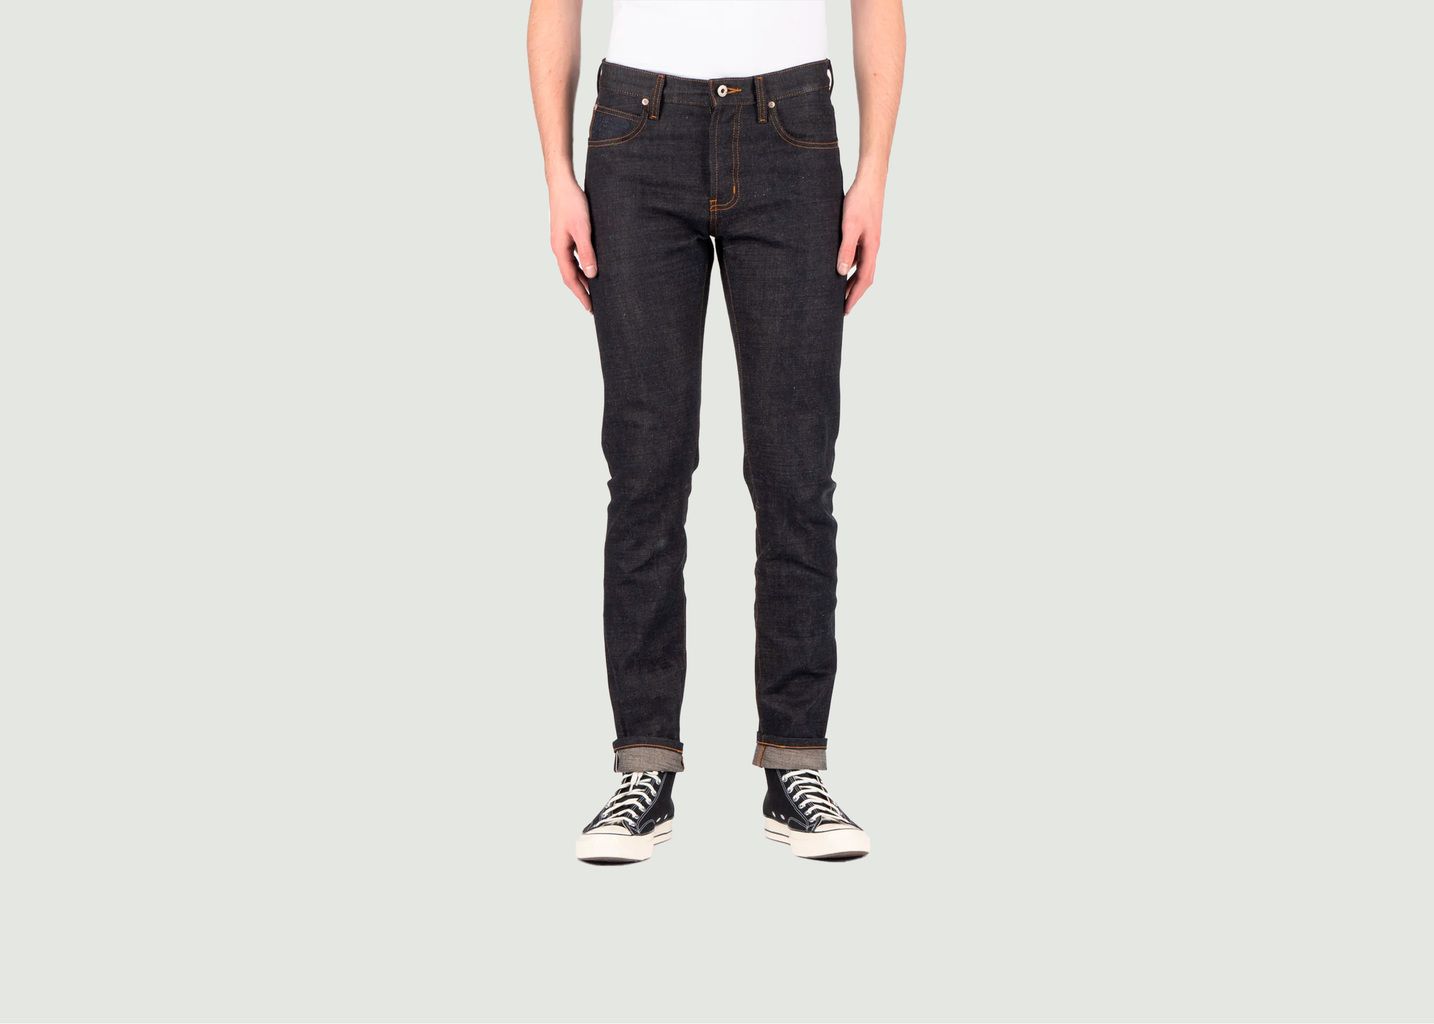 Naked & Famous Super Guy Jeans